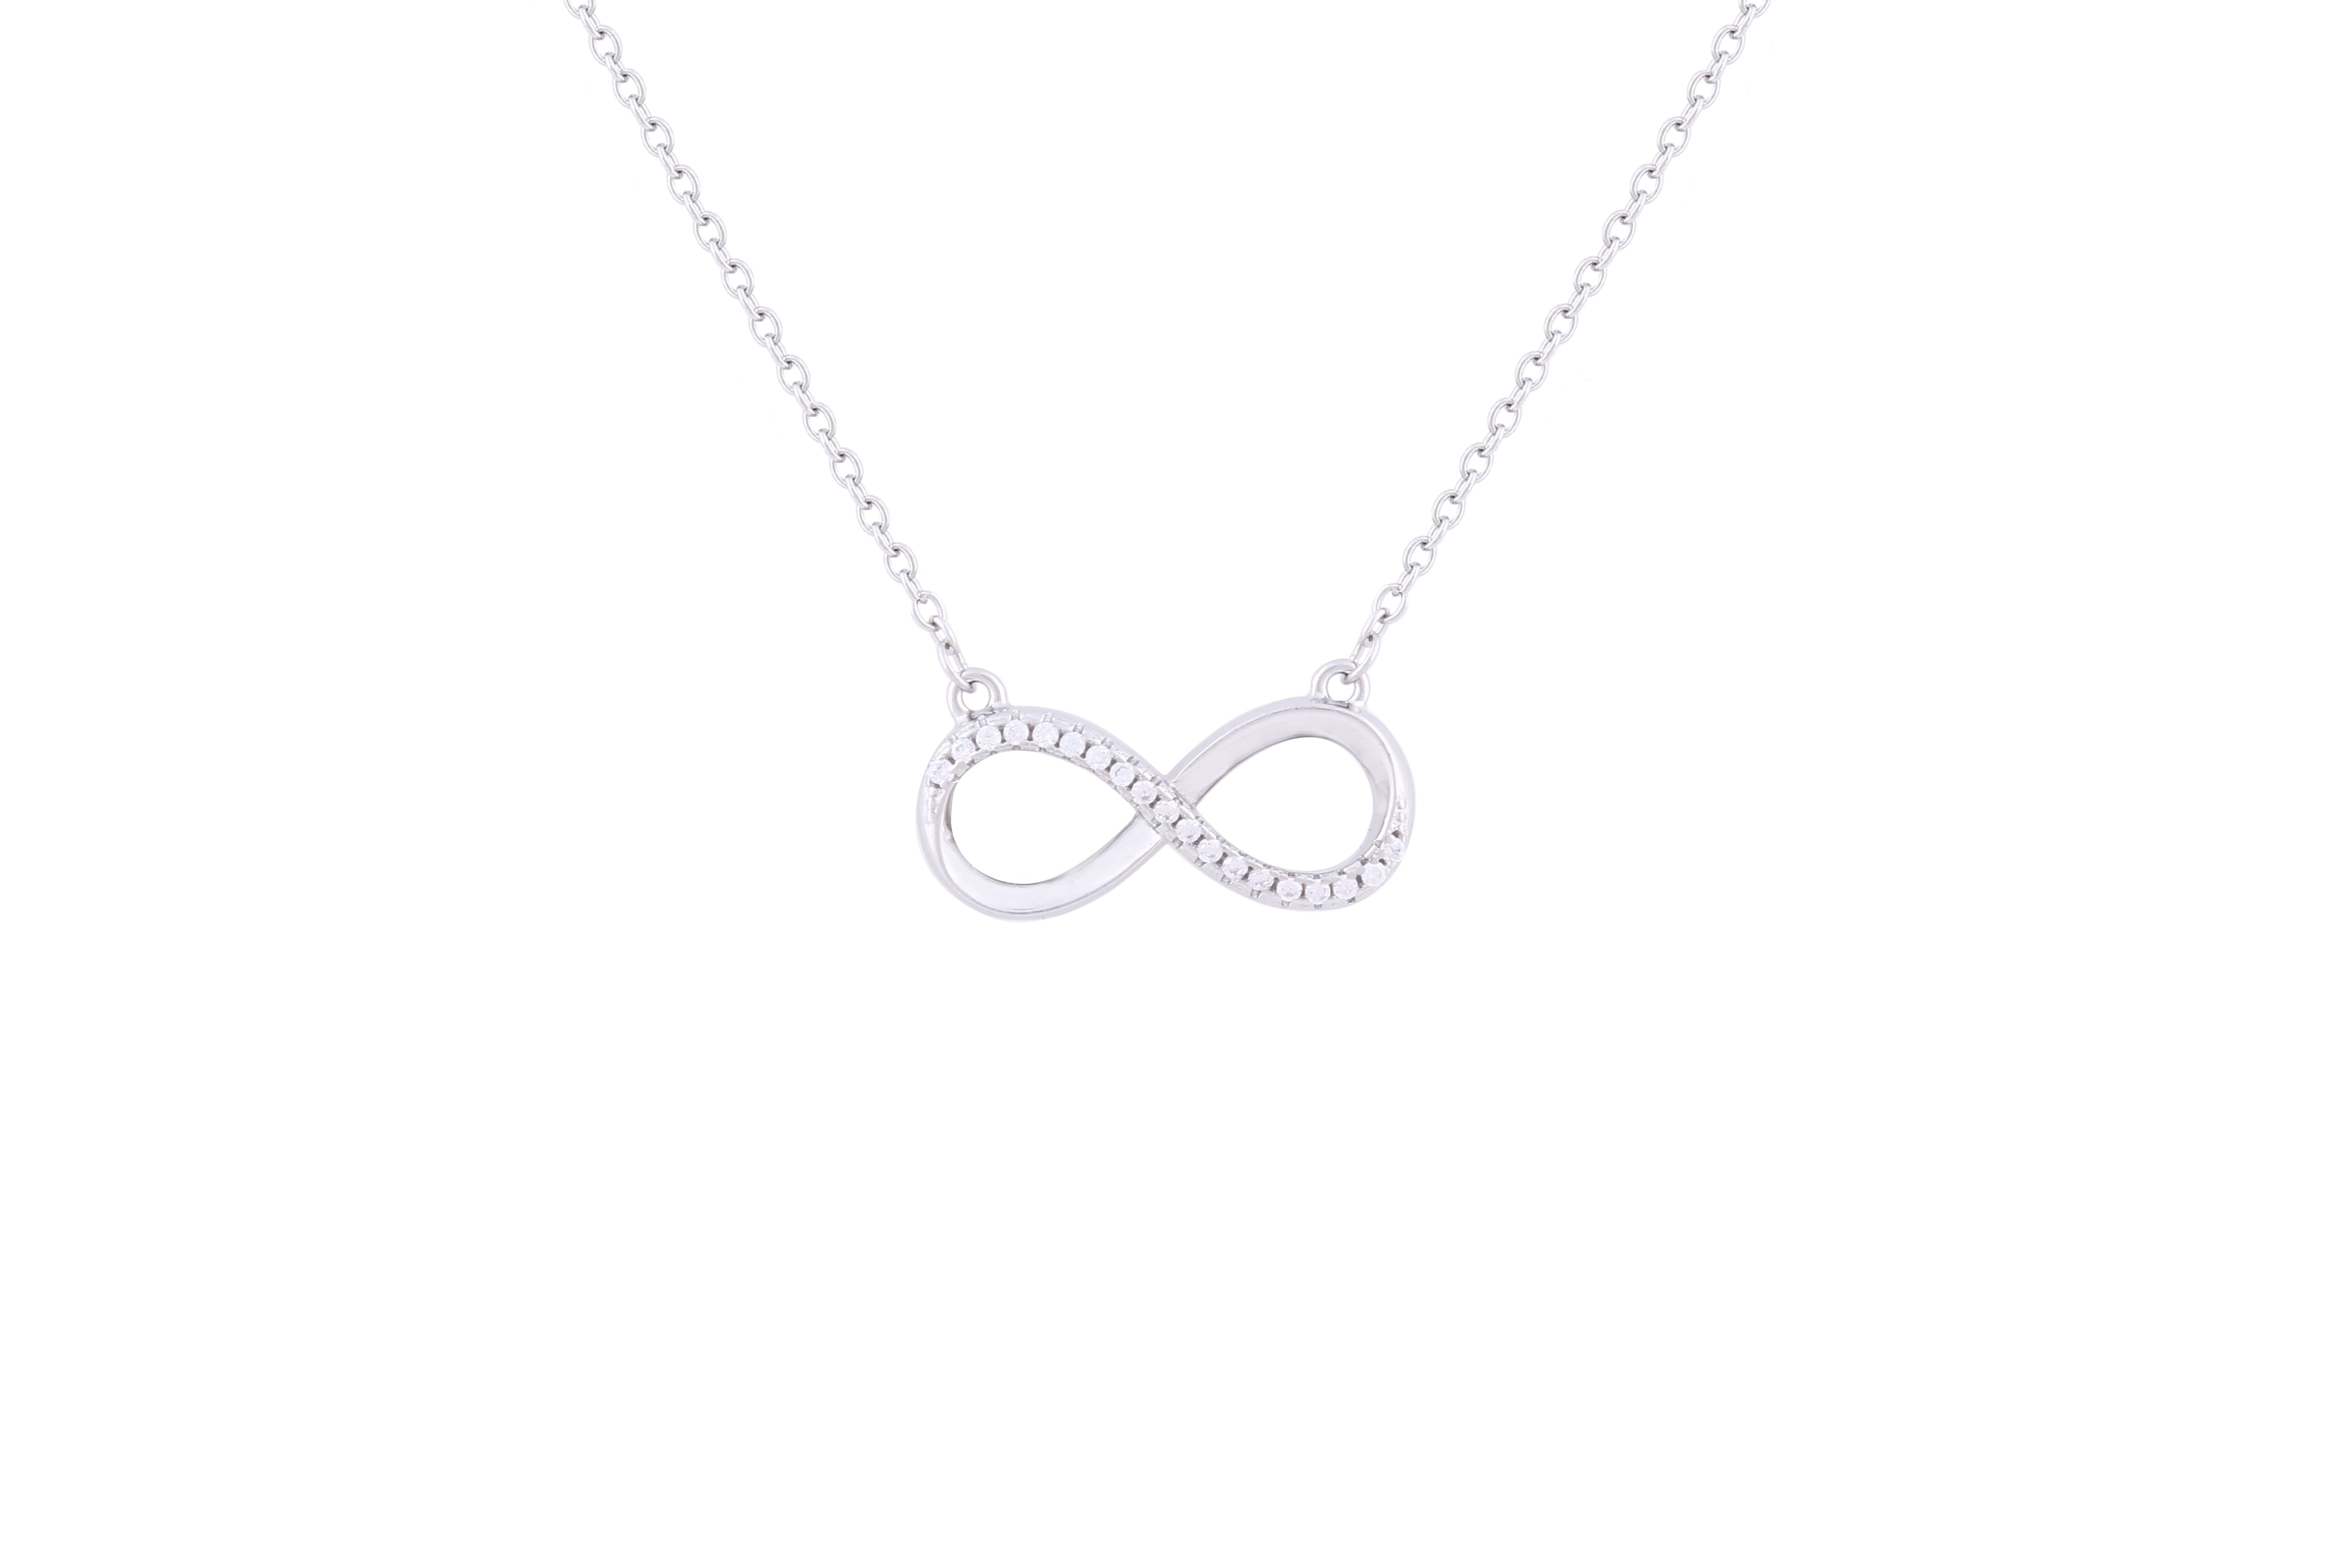 Asfour Sterling Silver Infinity Necklace Inlaid With Zircon Stones ND0015